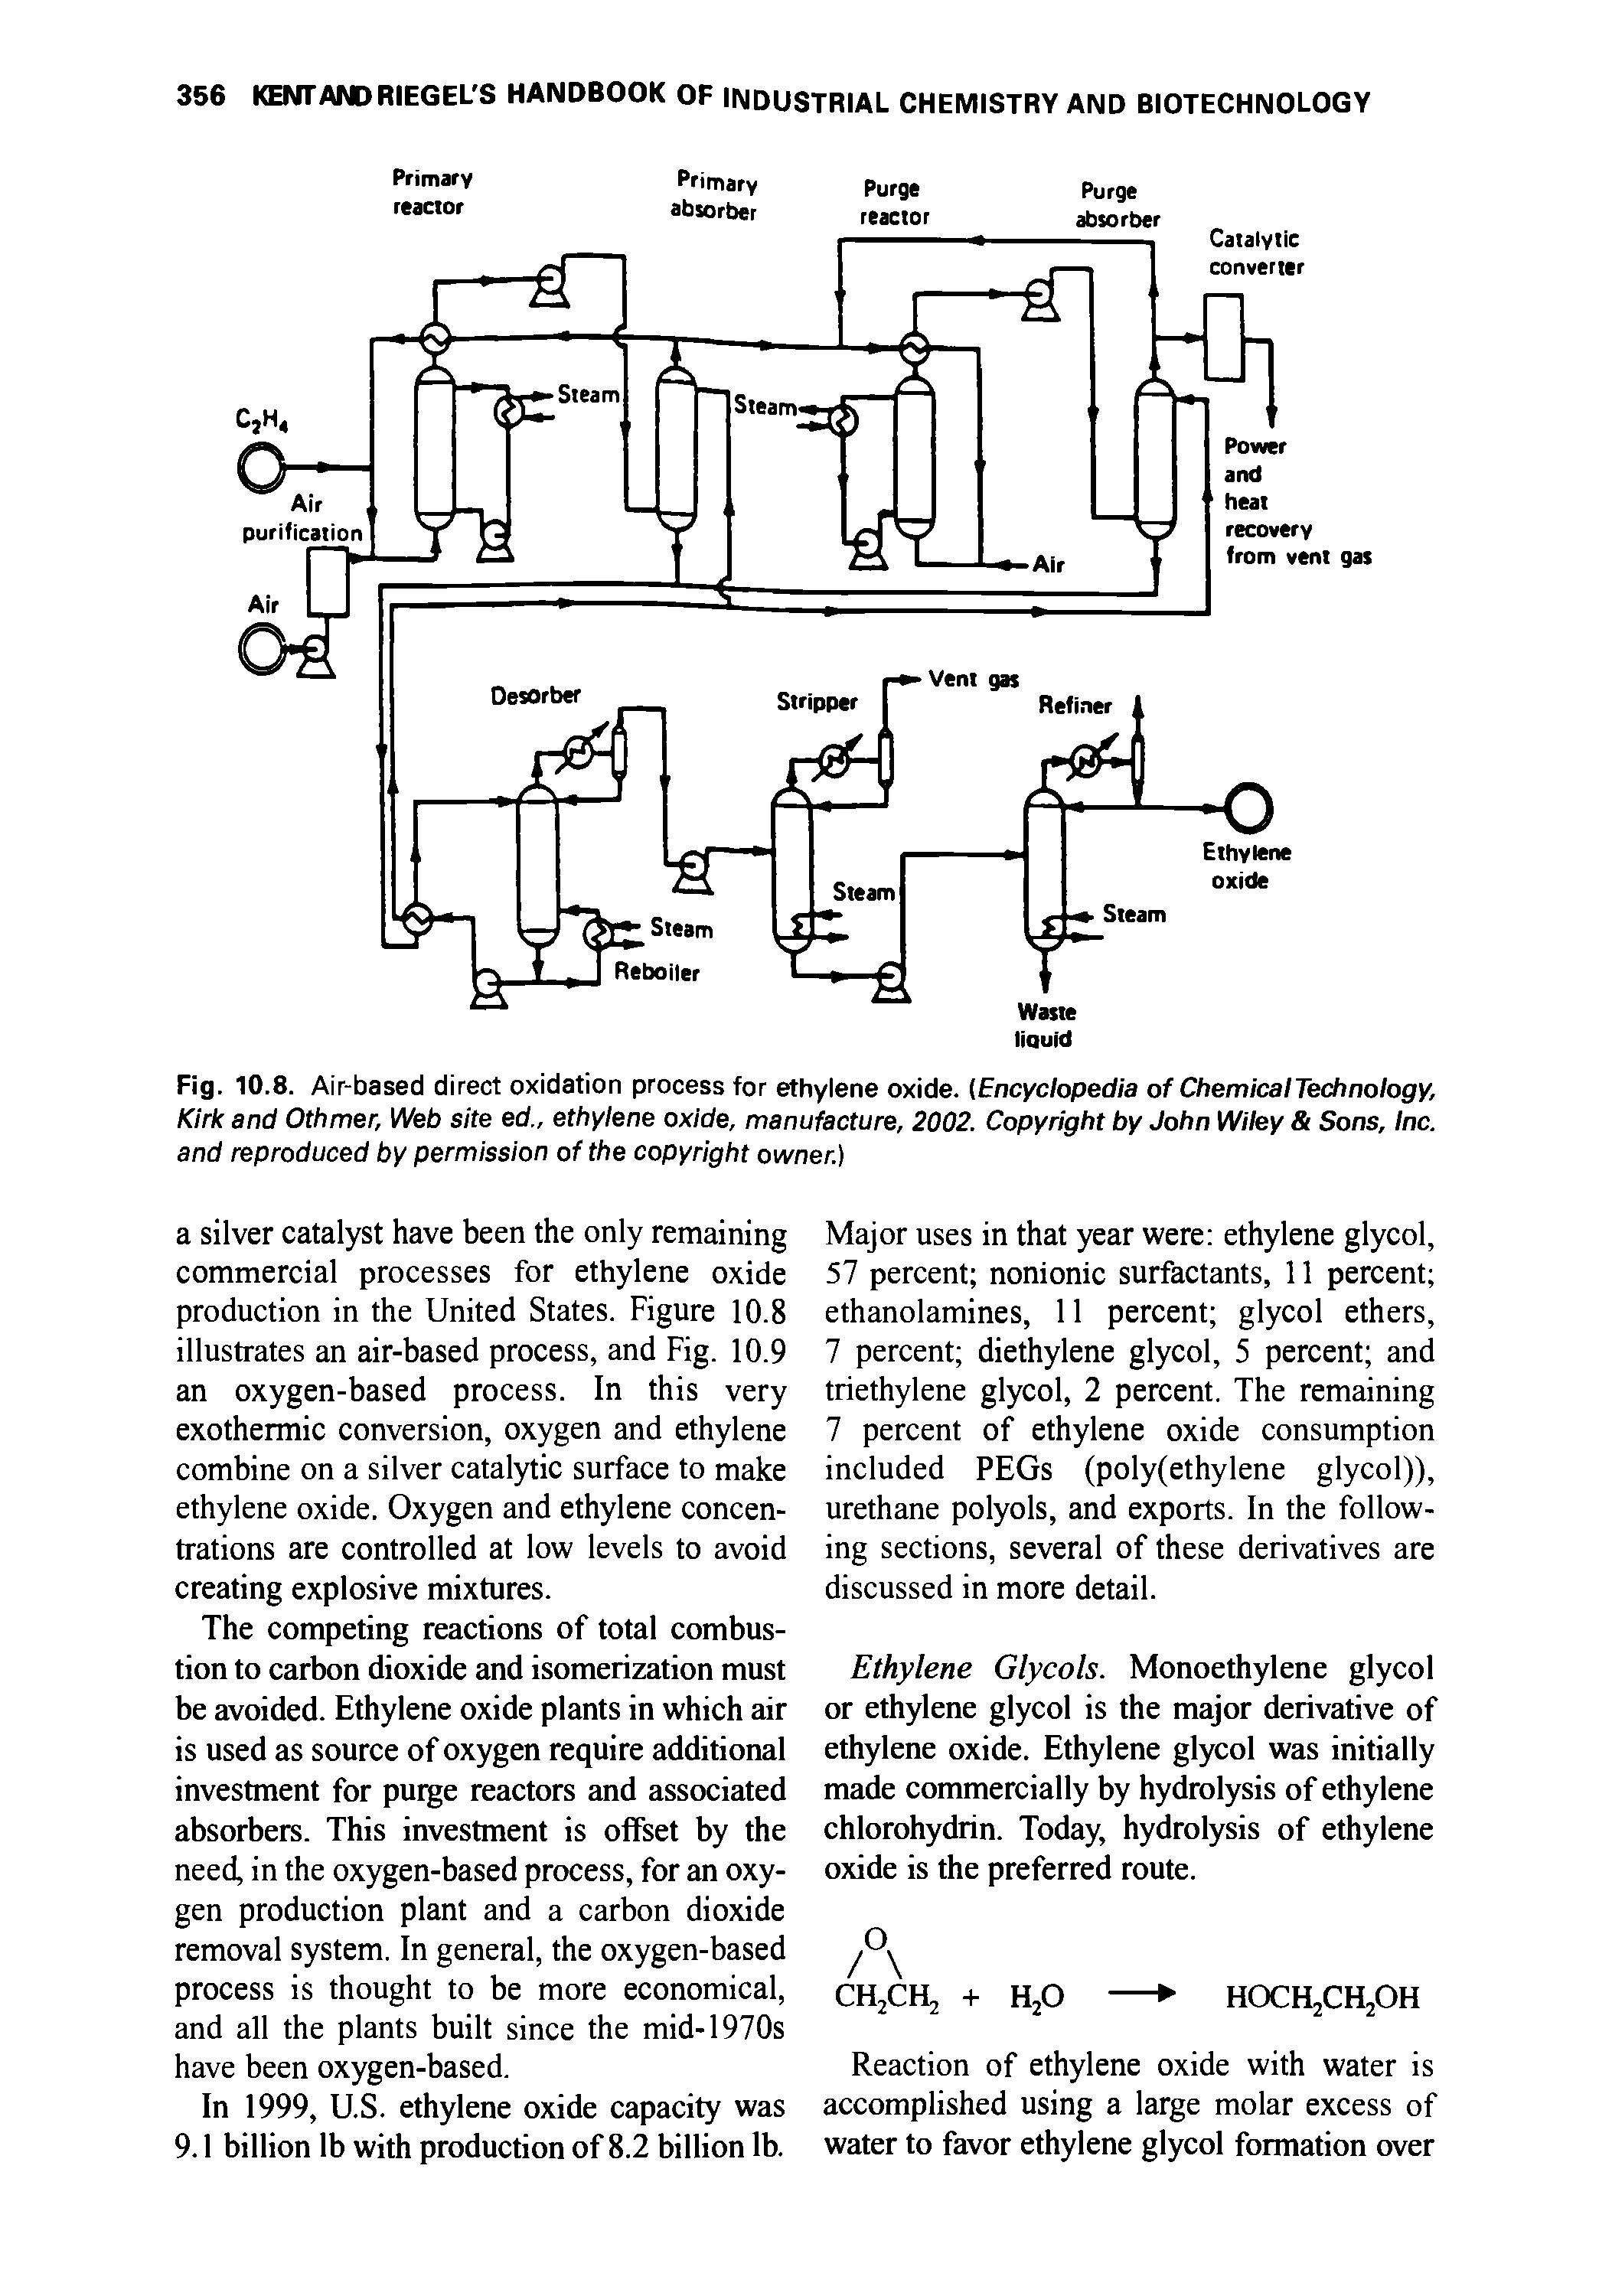 Fig. 10.8. Air-based direct oxidation process for ethylene oxide. (Encyclopedia of ChemicalTechnology, Kirk and Othmer, Web site ed., ethylene oxide, manufacture, 2002. Copyright by John Wiley Sons, Inc. and reproduced by permission of the copyright owner.)...